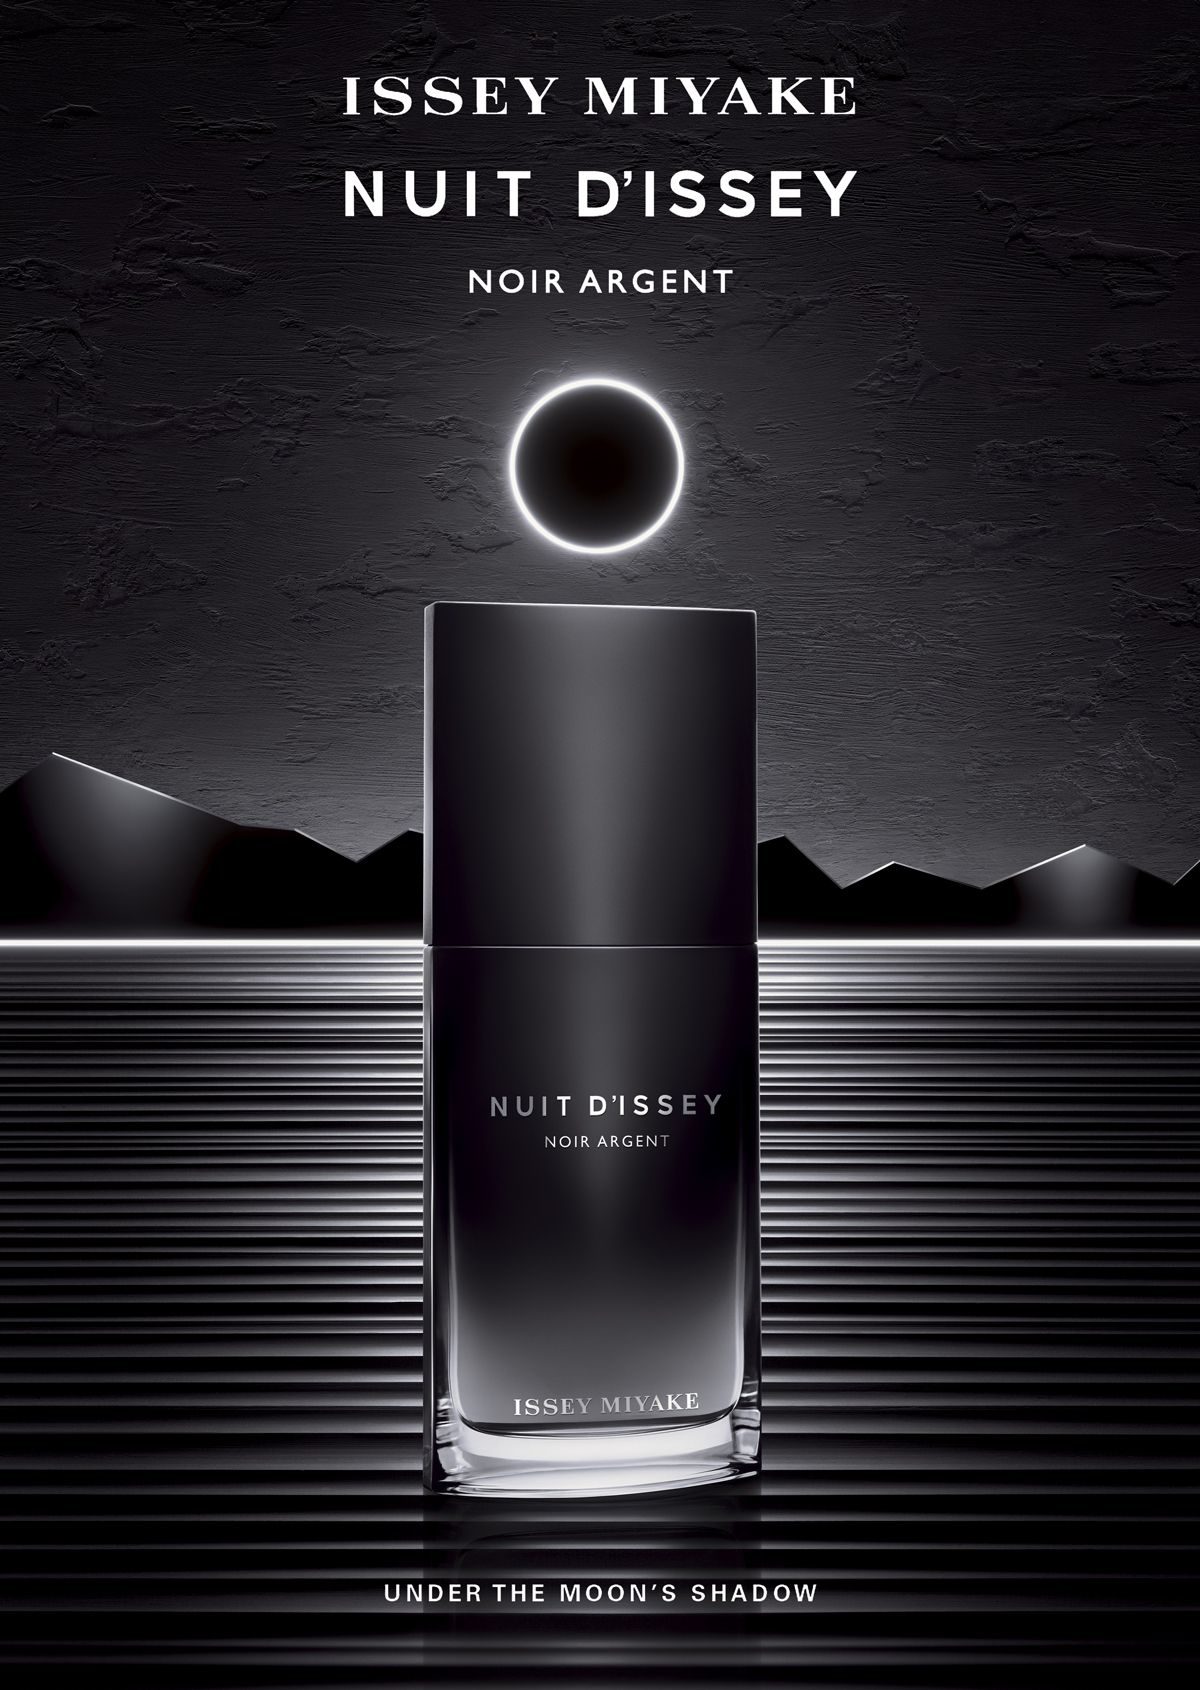 Issey Miyake Nuit D’Issey Noir Argent  The fashion house of Issey Miyake delights its wearers with a new tempting and exquisite fragrance for men, Nuit D’Issey Noir Argent. ‘Under the moon’s shadow’ comes the new perfume’s slogan thus inspiring an intense, long-lasting and an evening masculine perfume for manly-man. Issey Miyake Nuit D’Issey Noir Argent is described as a fresh/woody intense fragrance with a nice and arresting aroma to beckon a woman’s heart. Created by famous perfumer Dominique Ropion and marked by the Shiseido Group, the new fragrance will constantly seduce with its lingering sensuality.     Nuit D’Issey Noir Argent opens with spice notes of pink and black pepper, nutmeg, leather along with woody ingredients of patchouli, wood, myrrh, oriental saffron, and vetiver. Nuit D’Issey Noir Argent follows the original version Nuit D’Issey launched in 2014 and promises to elude the same radiance, elegant aroma as the original fragrance and not to dissatisfy.   Issey Miyake Nuit D’Issey Noir Argent is available in 100ml Eau de Toilette.